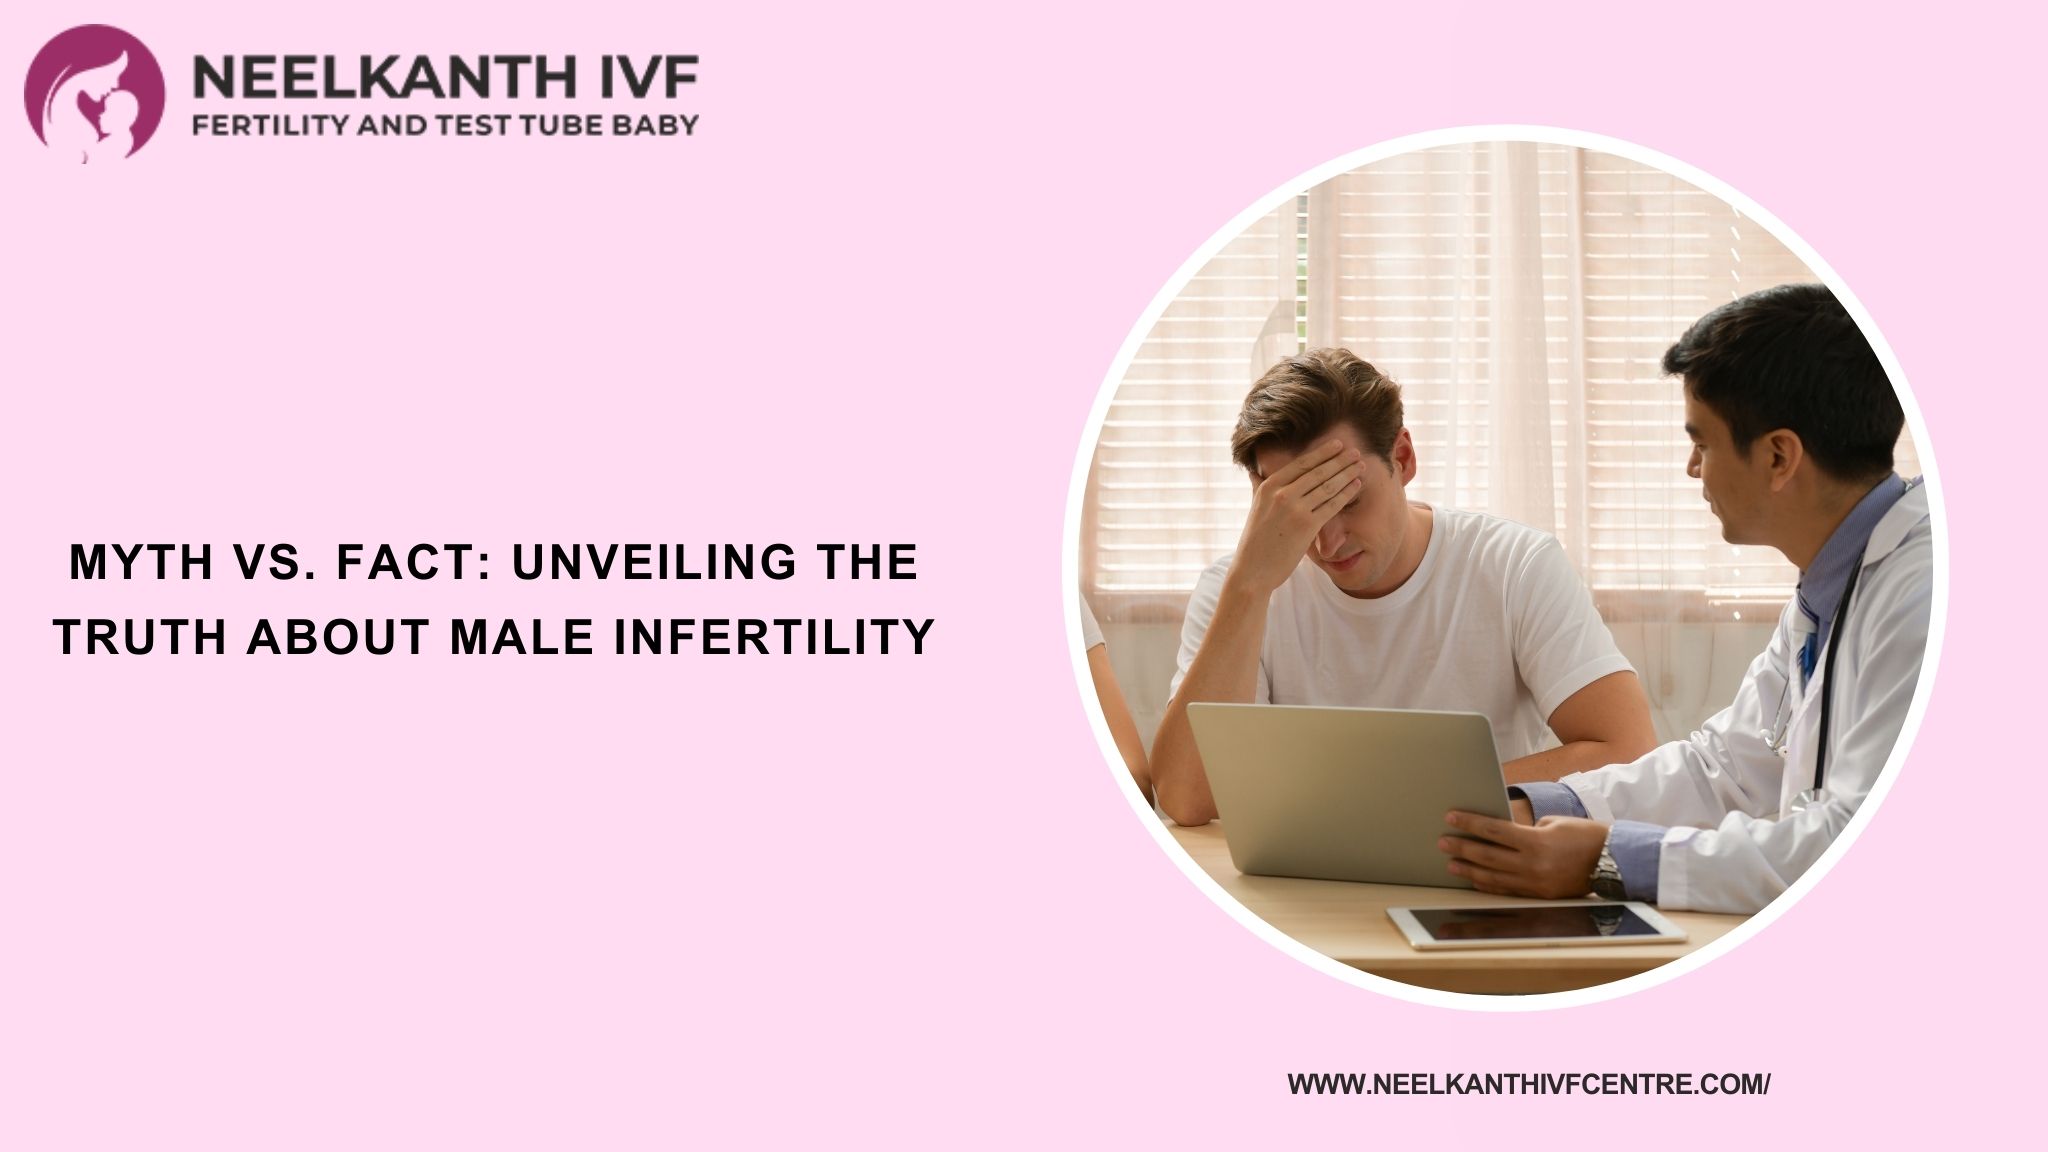 Myth vs. Fact: Unveiling the Truth about Male Infertility